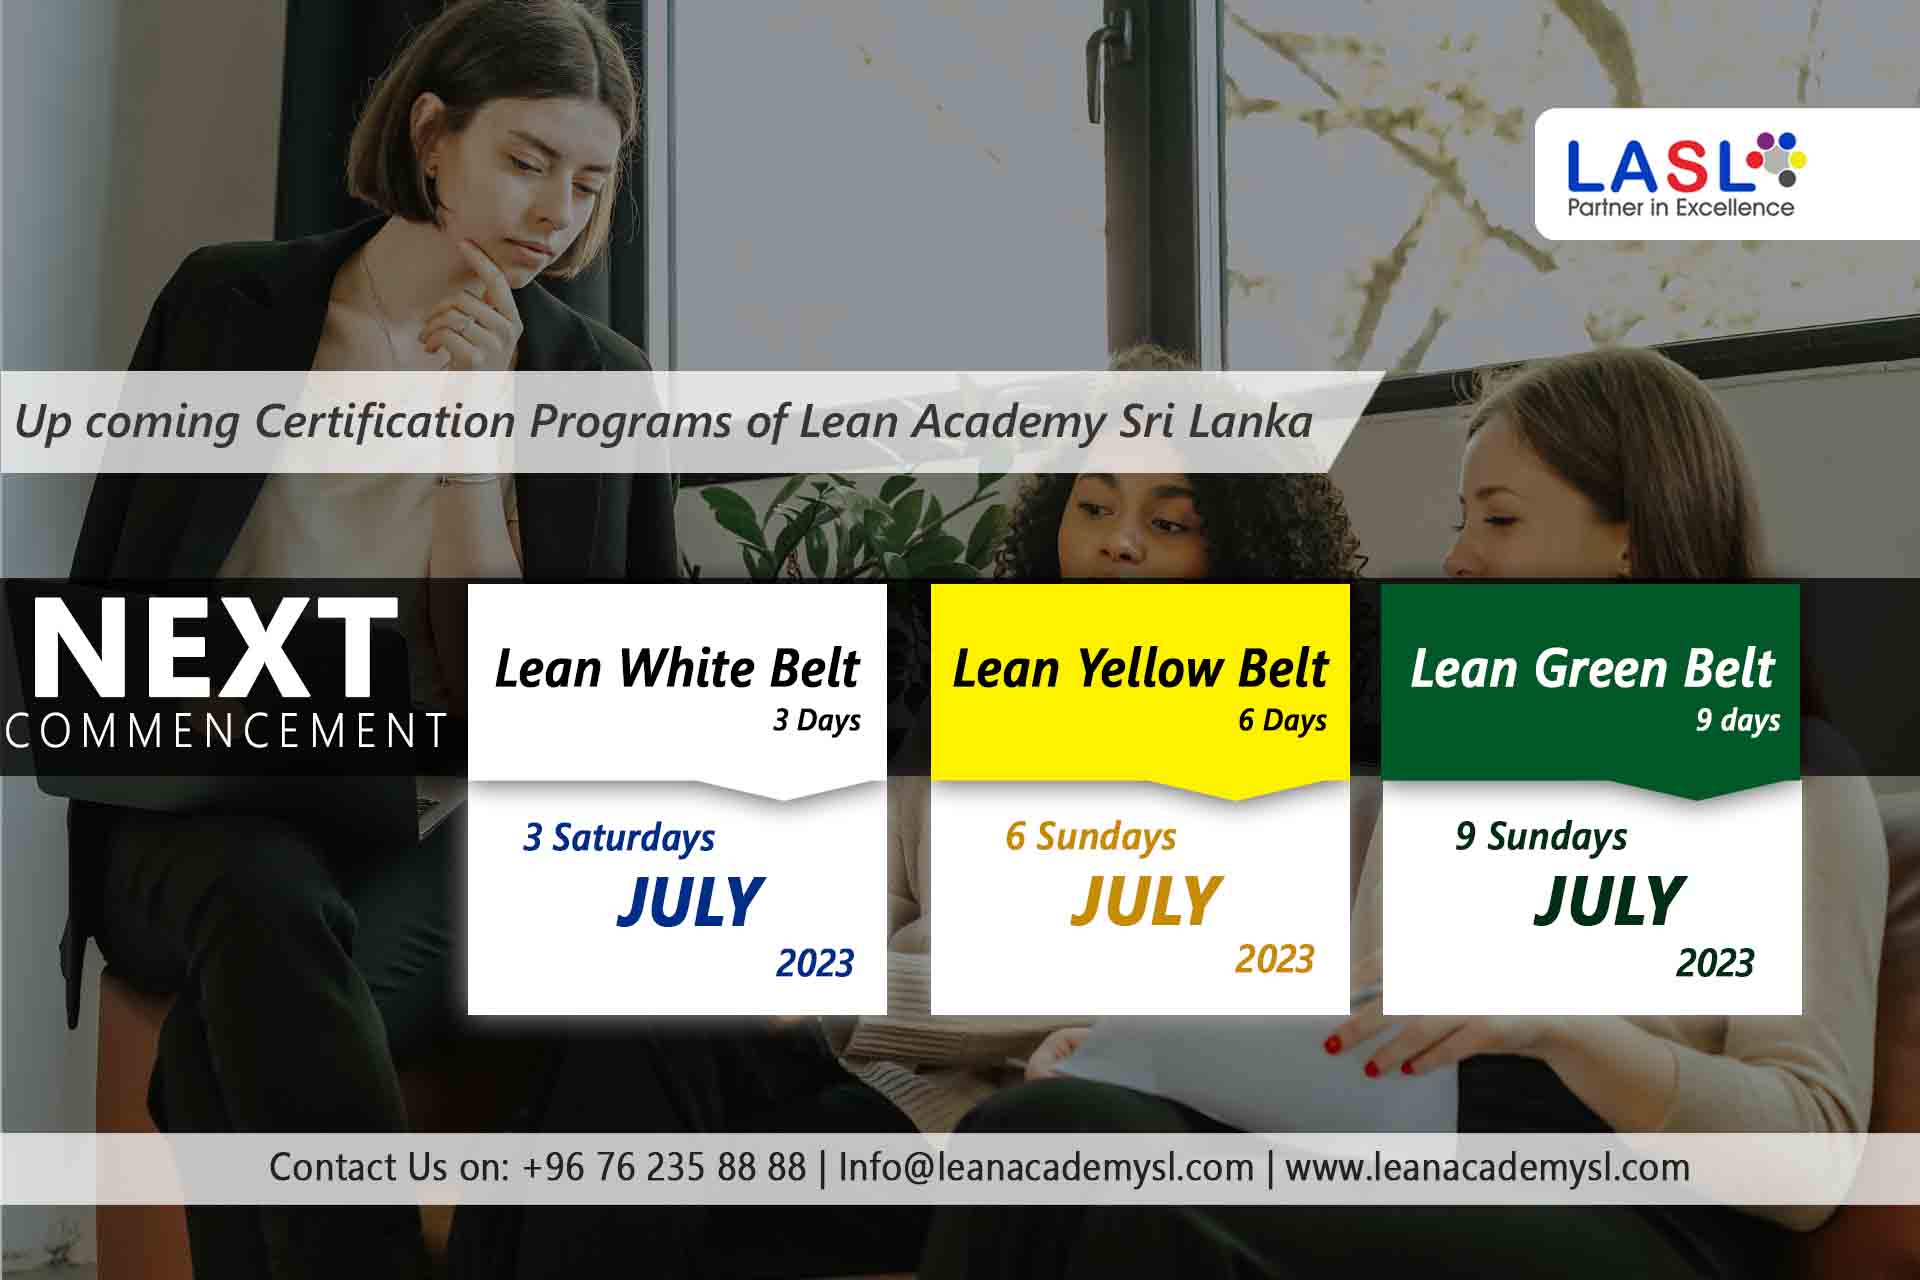 Learn and Lean with LASL